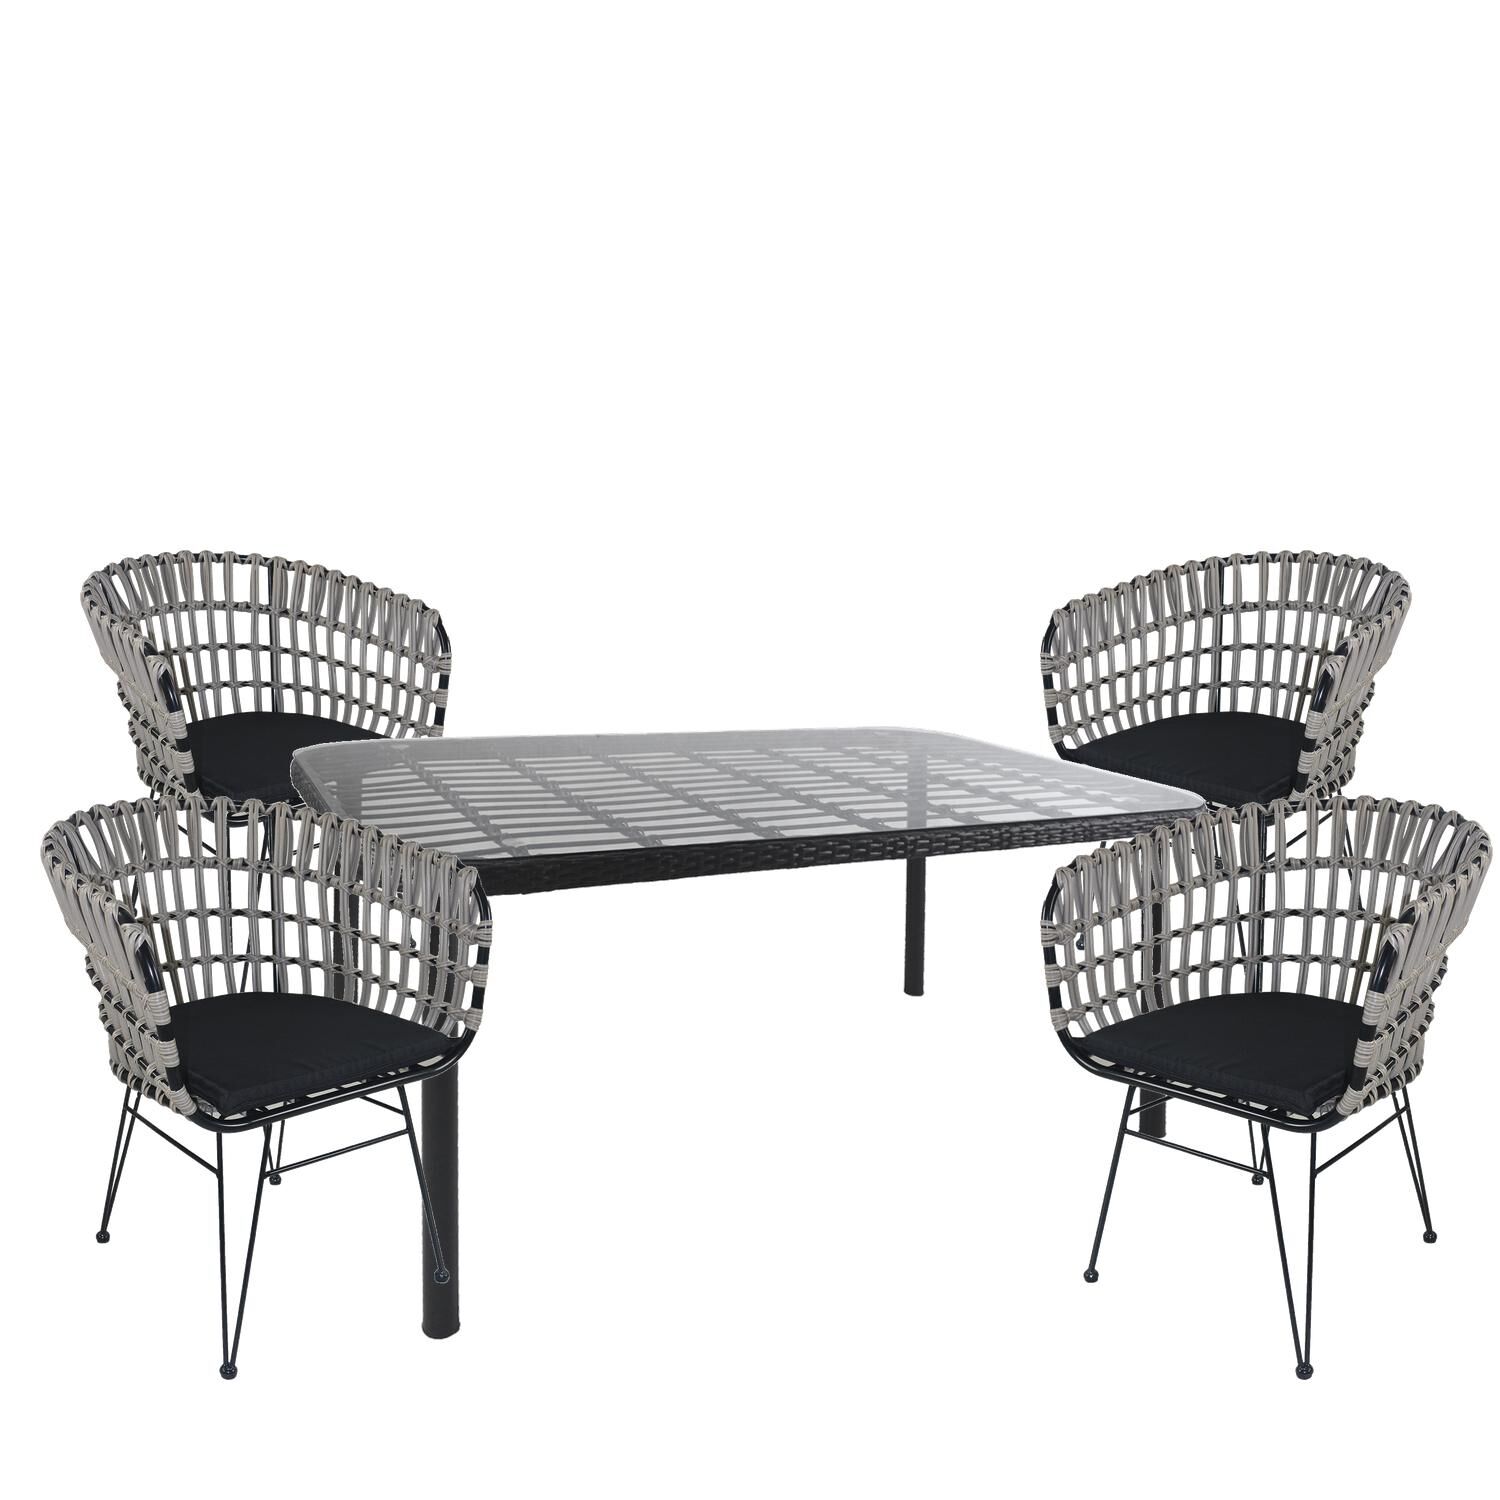 AMPIUS Garden Dining Set Black Metal/Rattan/Glass With 4 Chairs 14990391